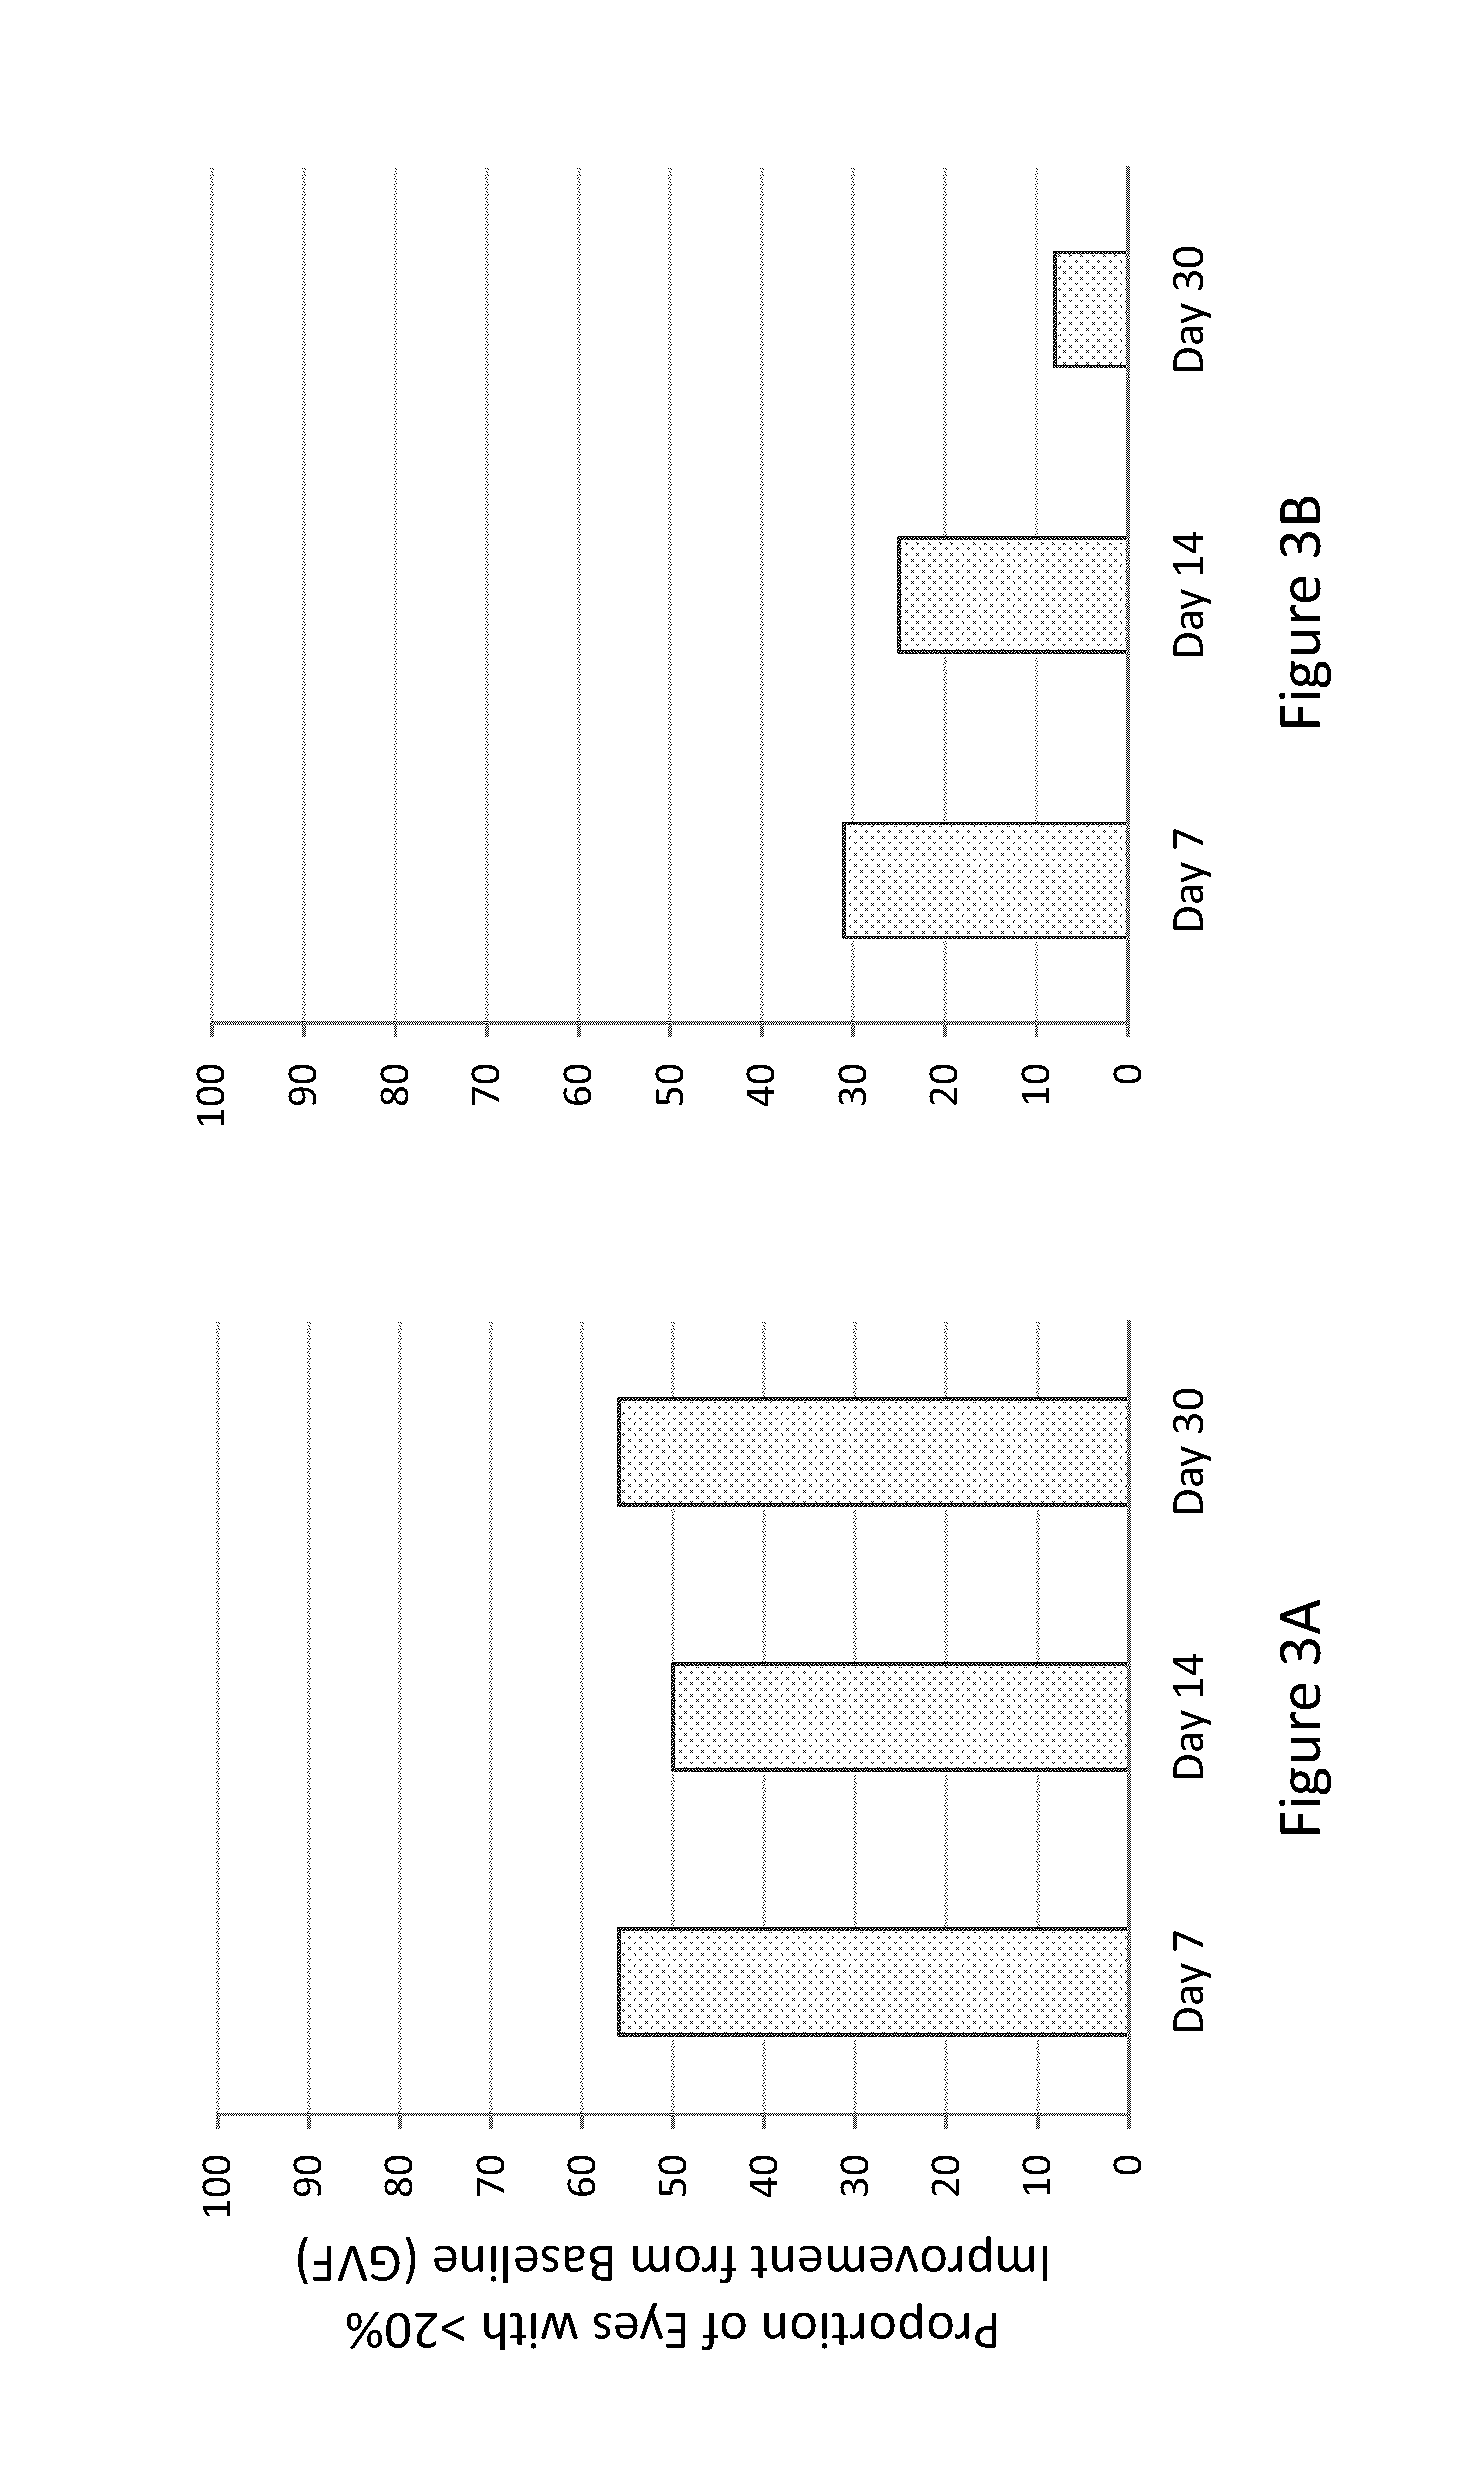 Therapeutic regimens and methods for improving visual function in visual disorders associated with an endogenous retinoid deficiency